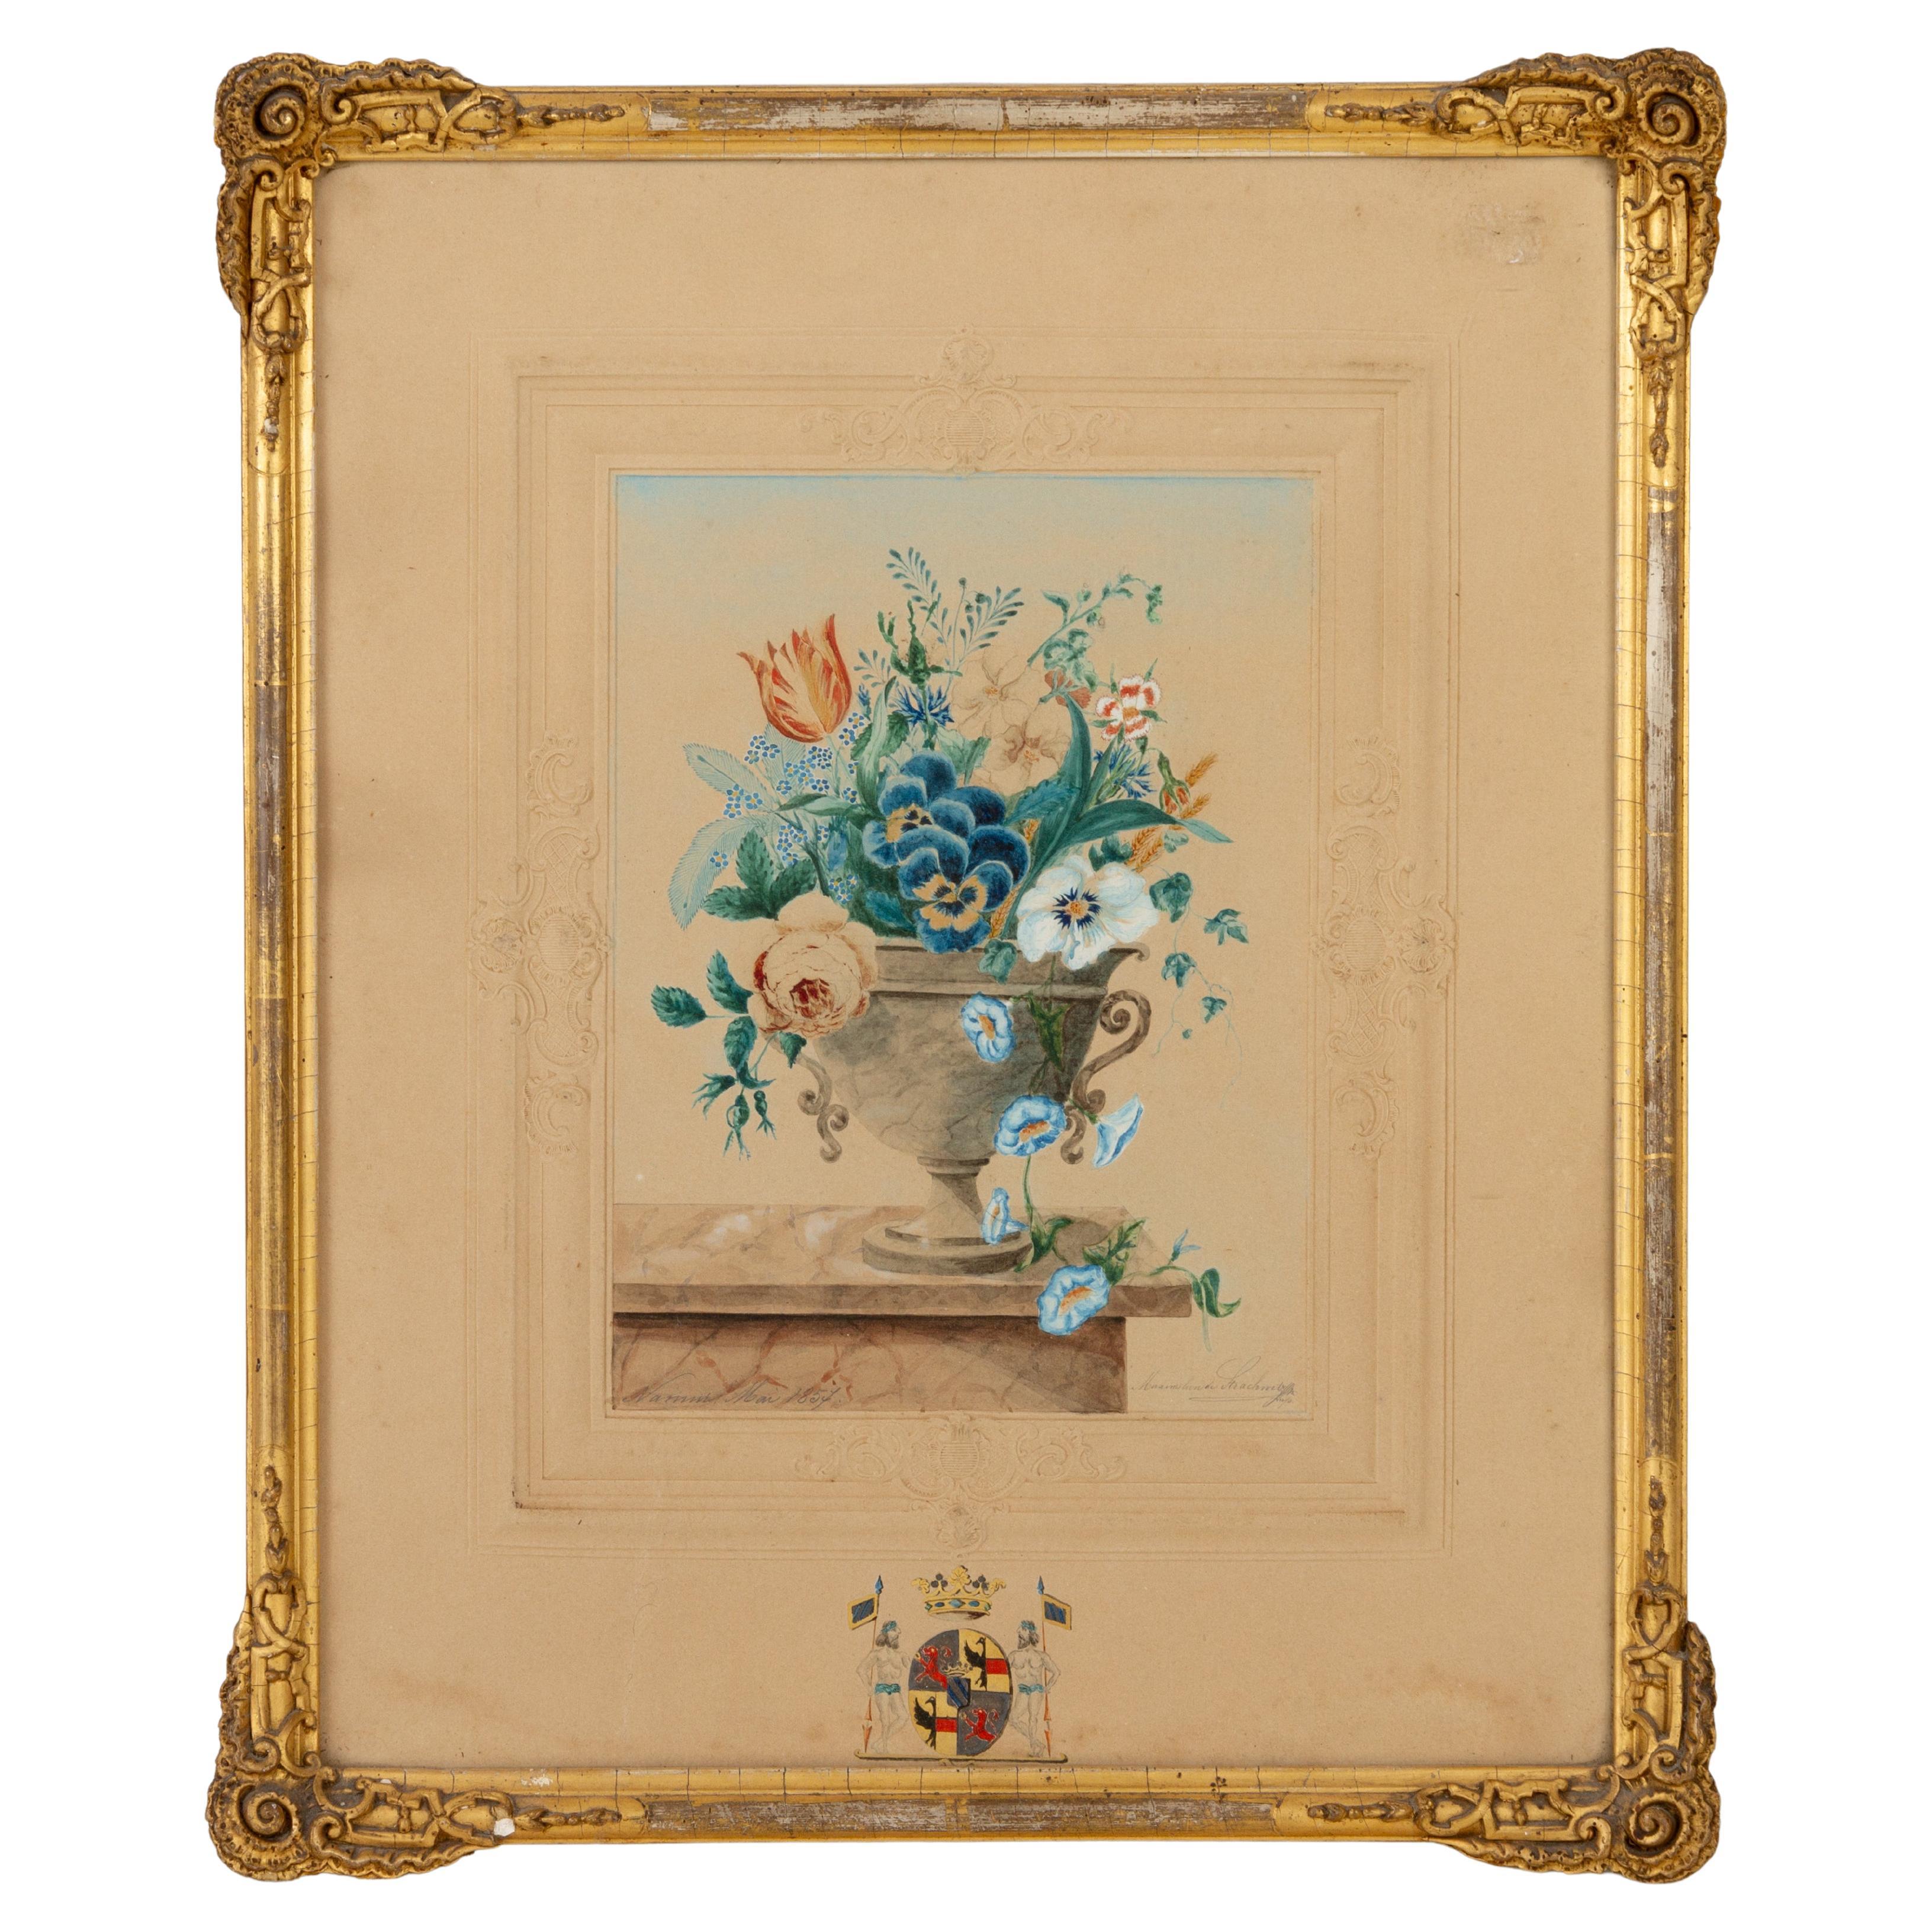 Coat of Arms Flowers Still Life Watercolour on Embossed Paper 19thC